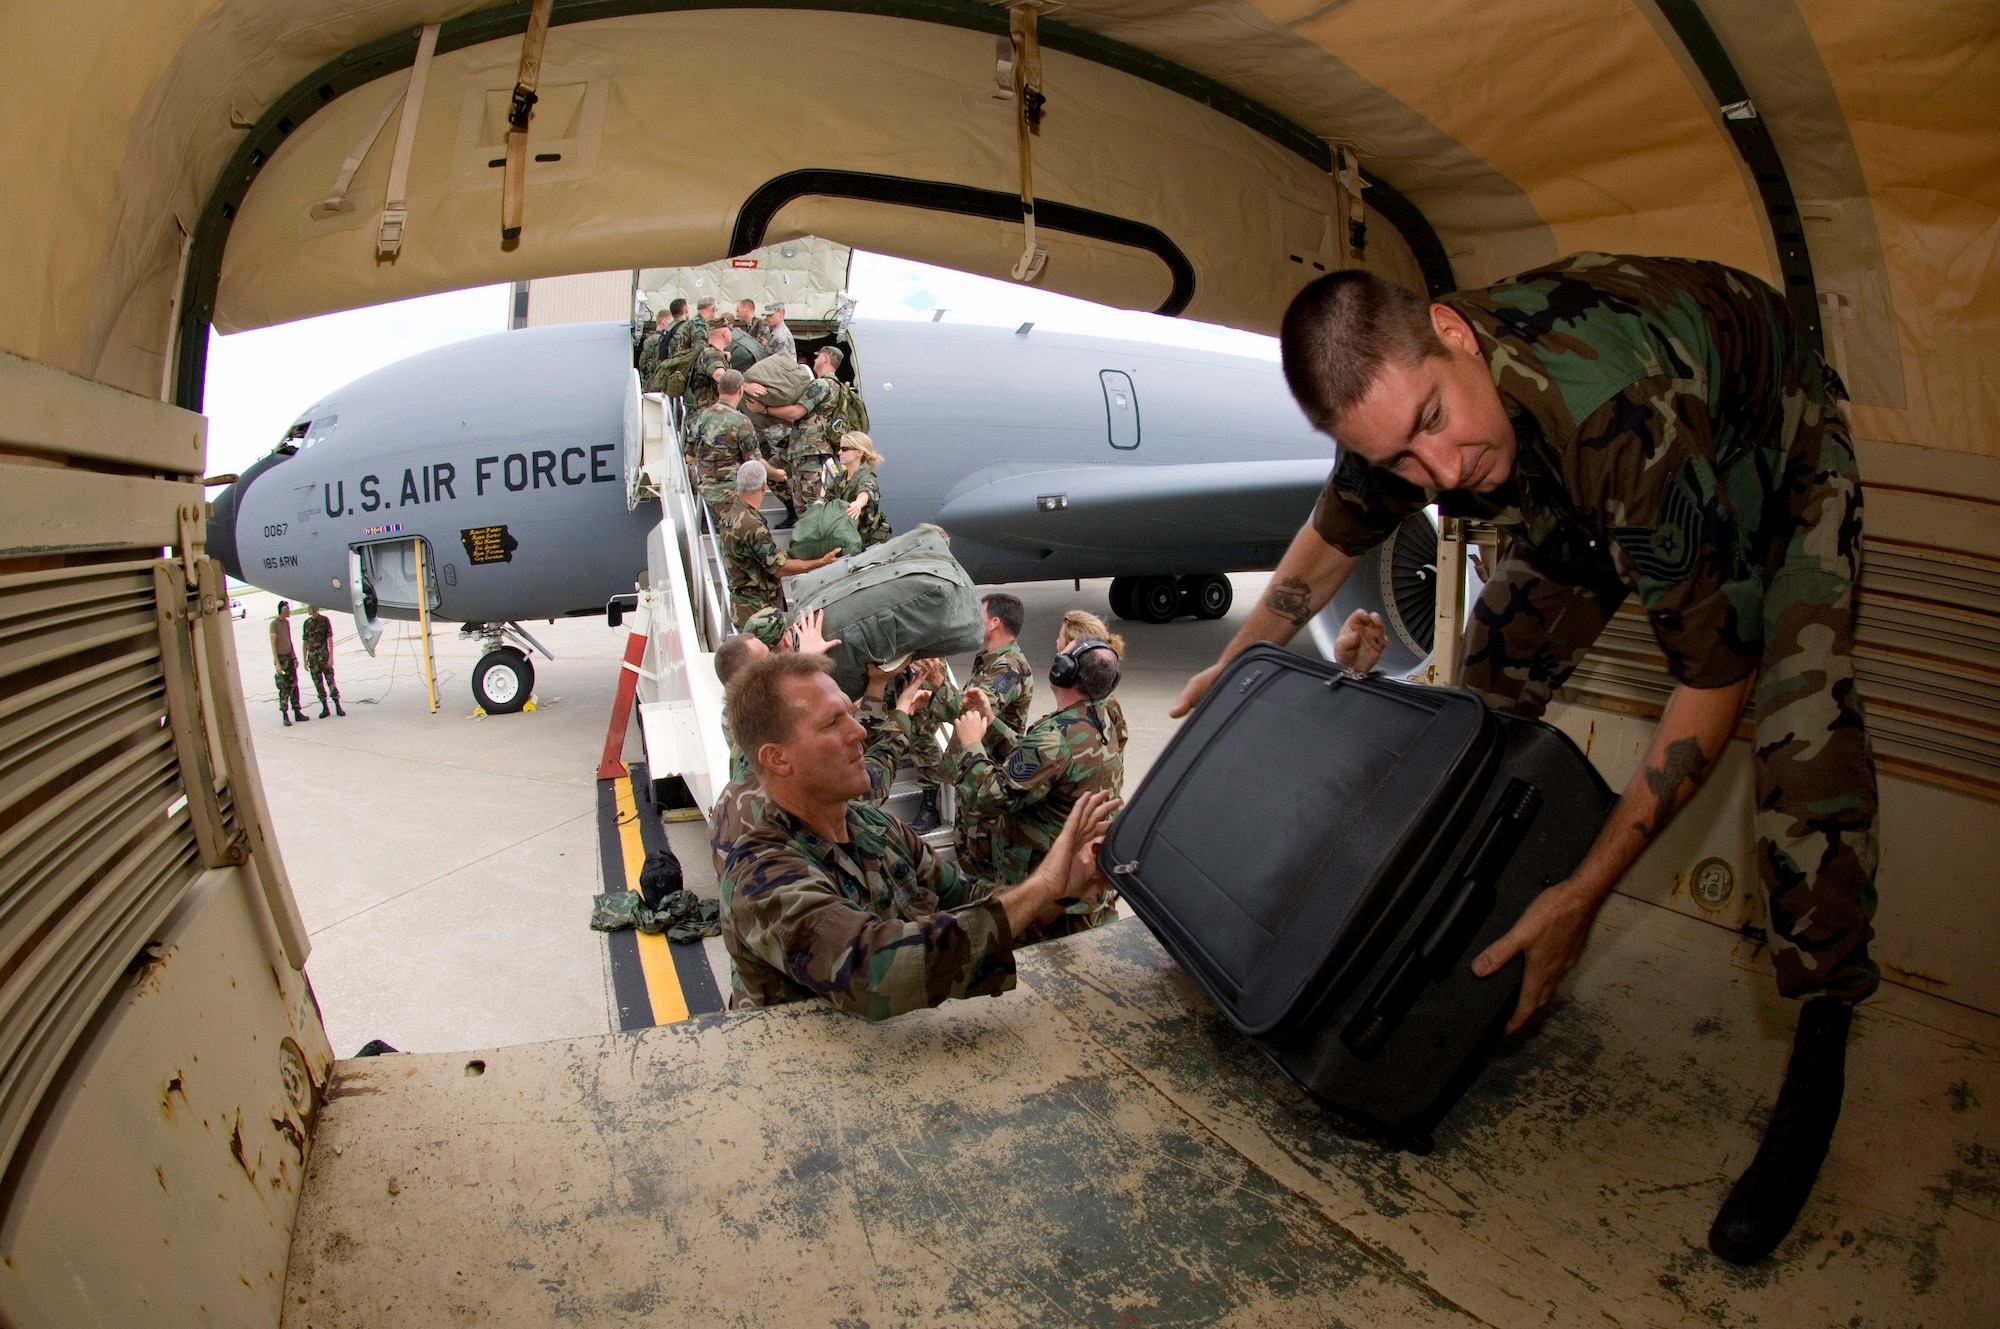 Members of the Iowa Air National Guard's 185th Air Refueling Wing unload their gear at the Eastern Iowa Airport in Cedar Rapids, Iowa. State officials activated the National Guard to the help with recovery efforts after massive flooding caused evacuations from towns along major rivers. (U.S. Air Force photo/Master Sgt. Jack Braden) 